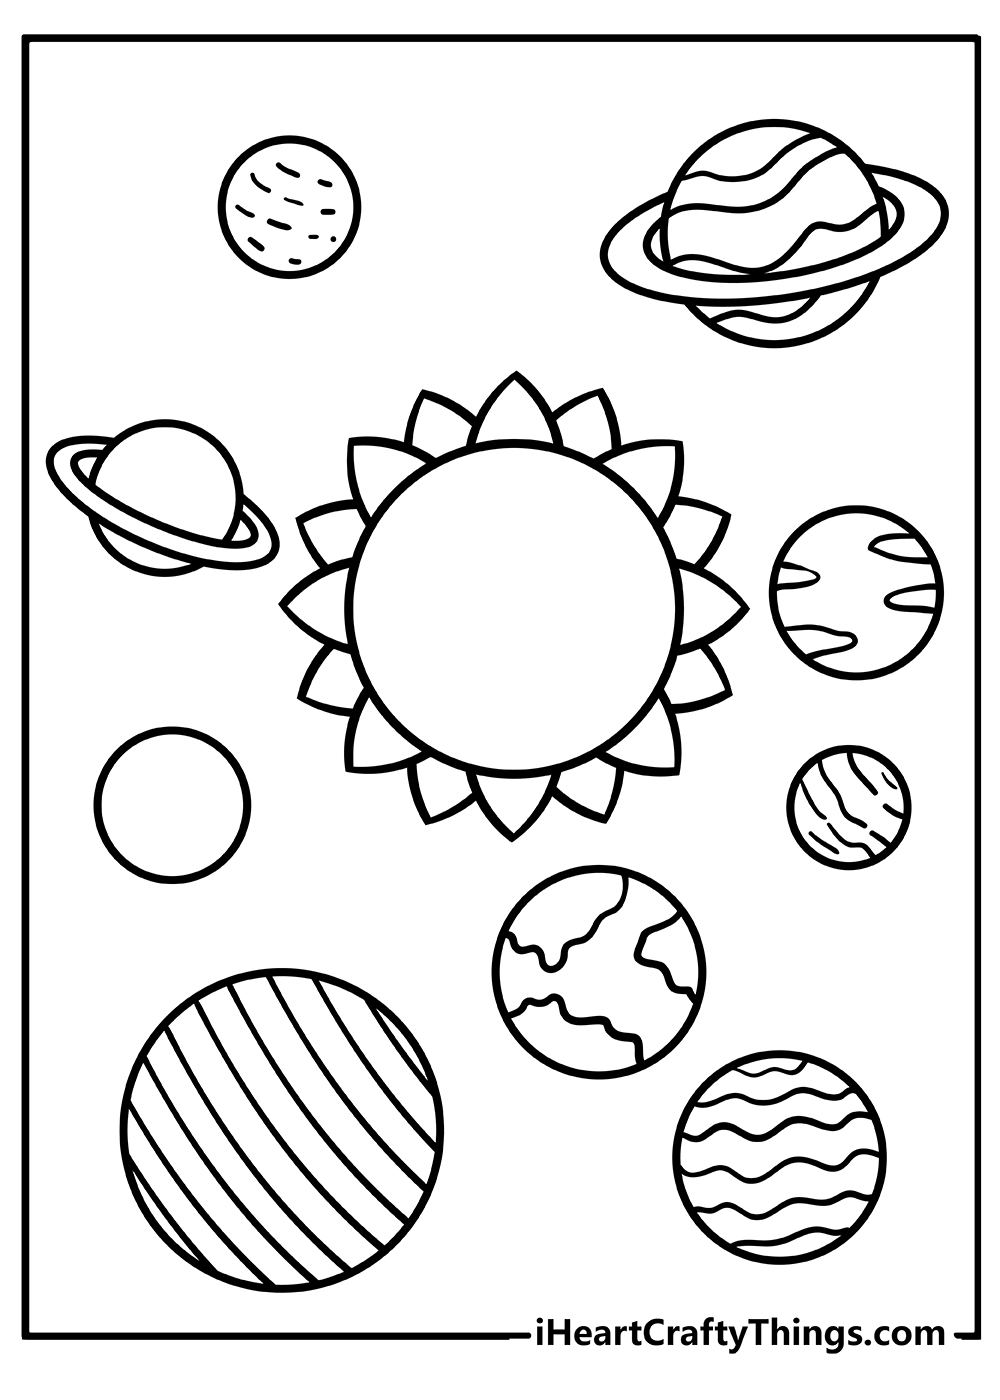 Printable Solar System Coloring Pages Updated 18